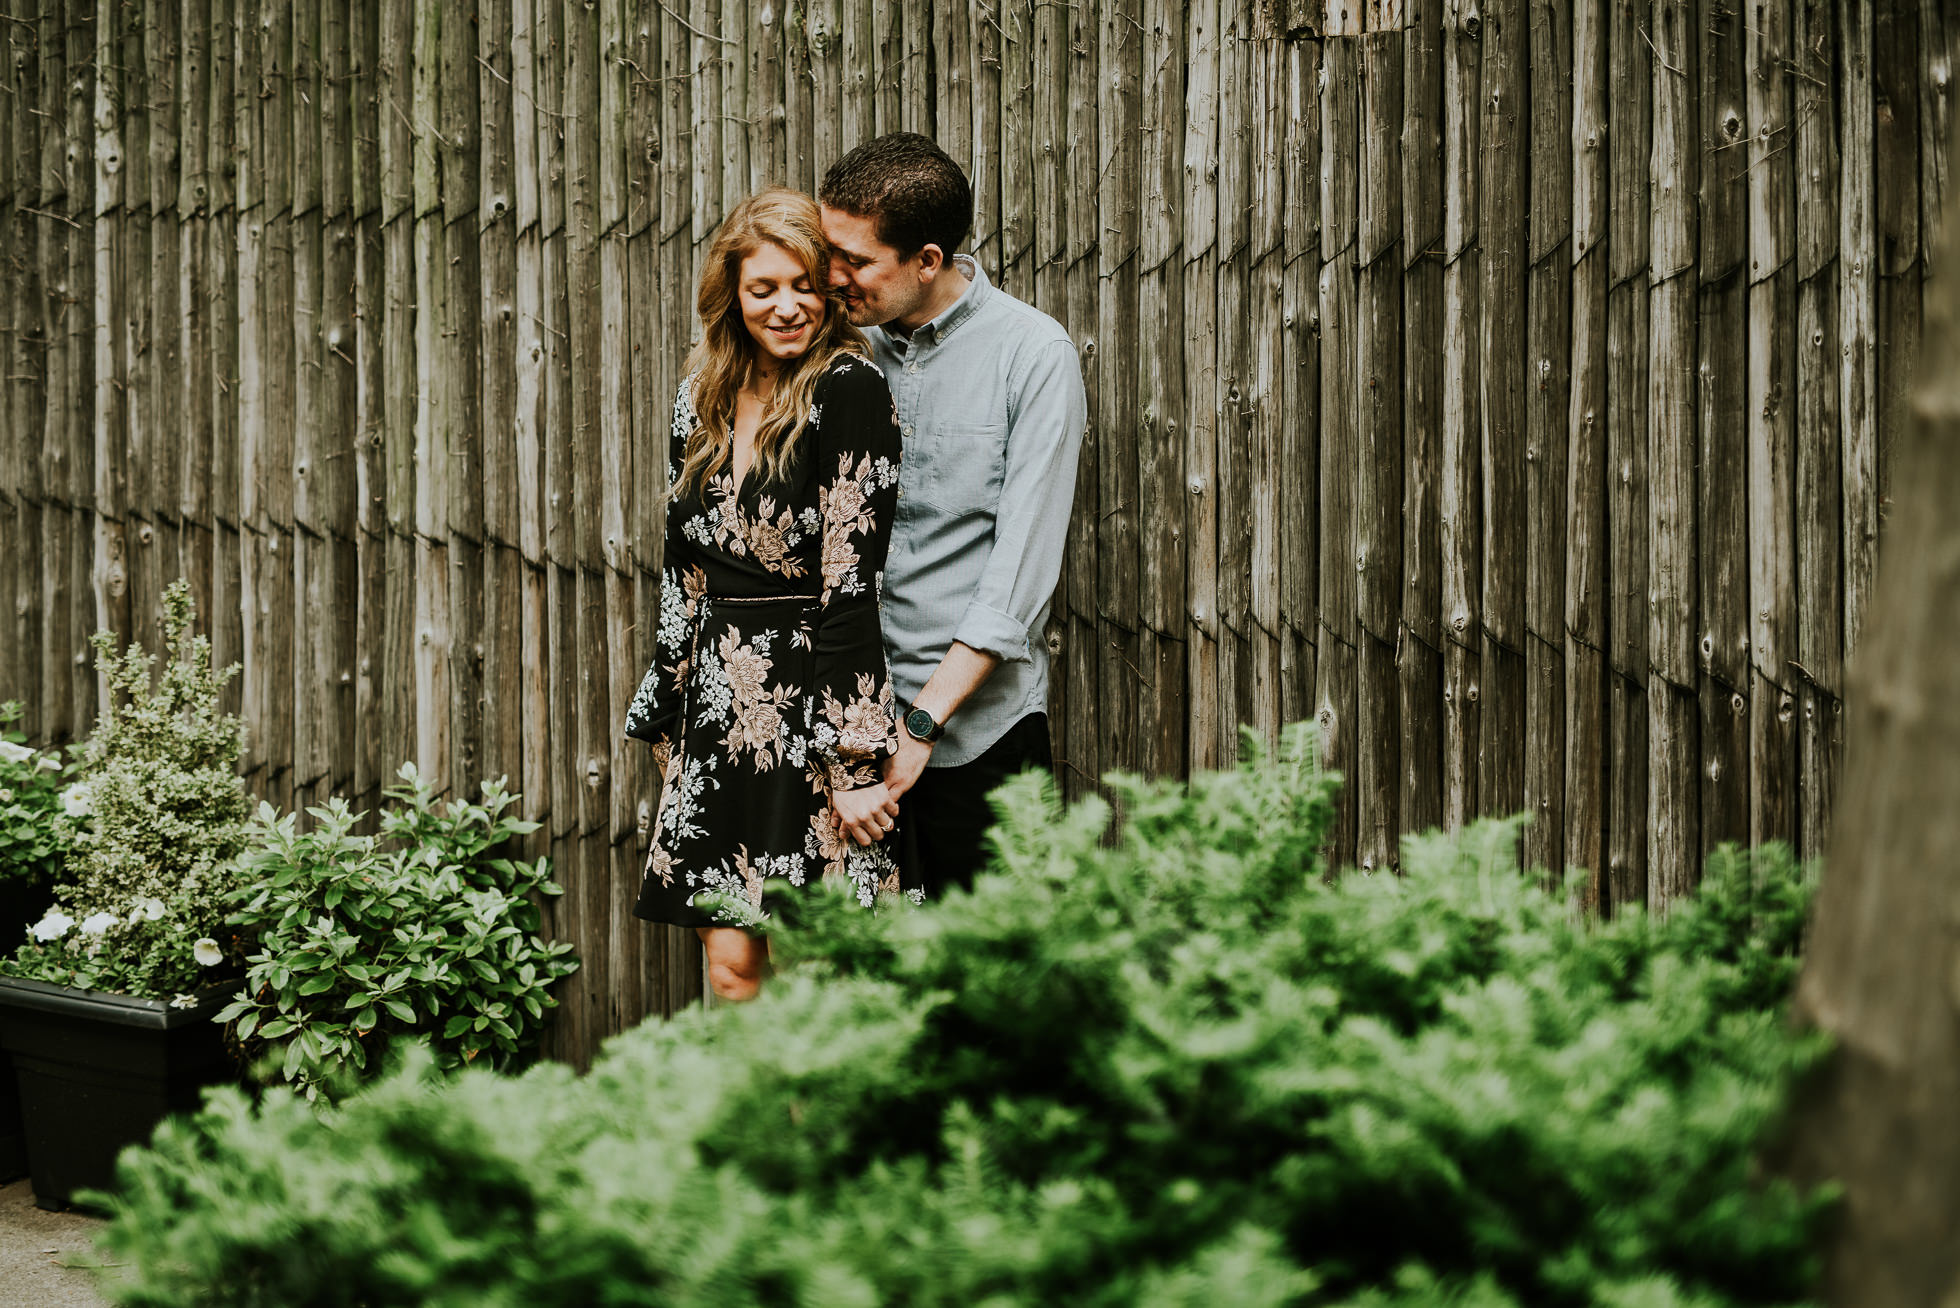 nyc wedding photo locations photographed by Traverse the Tides34